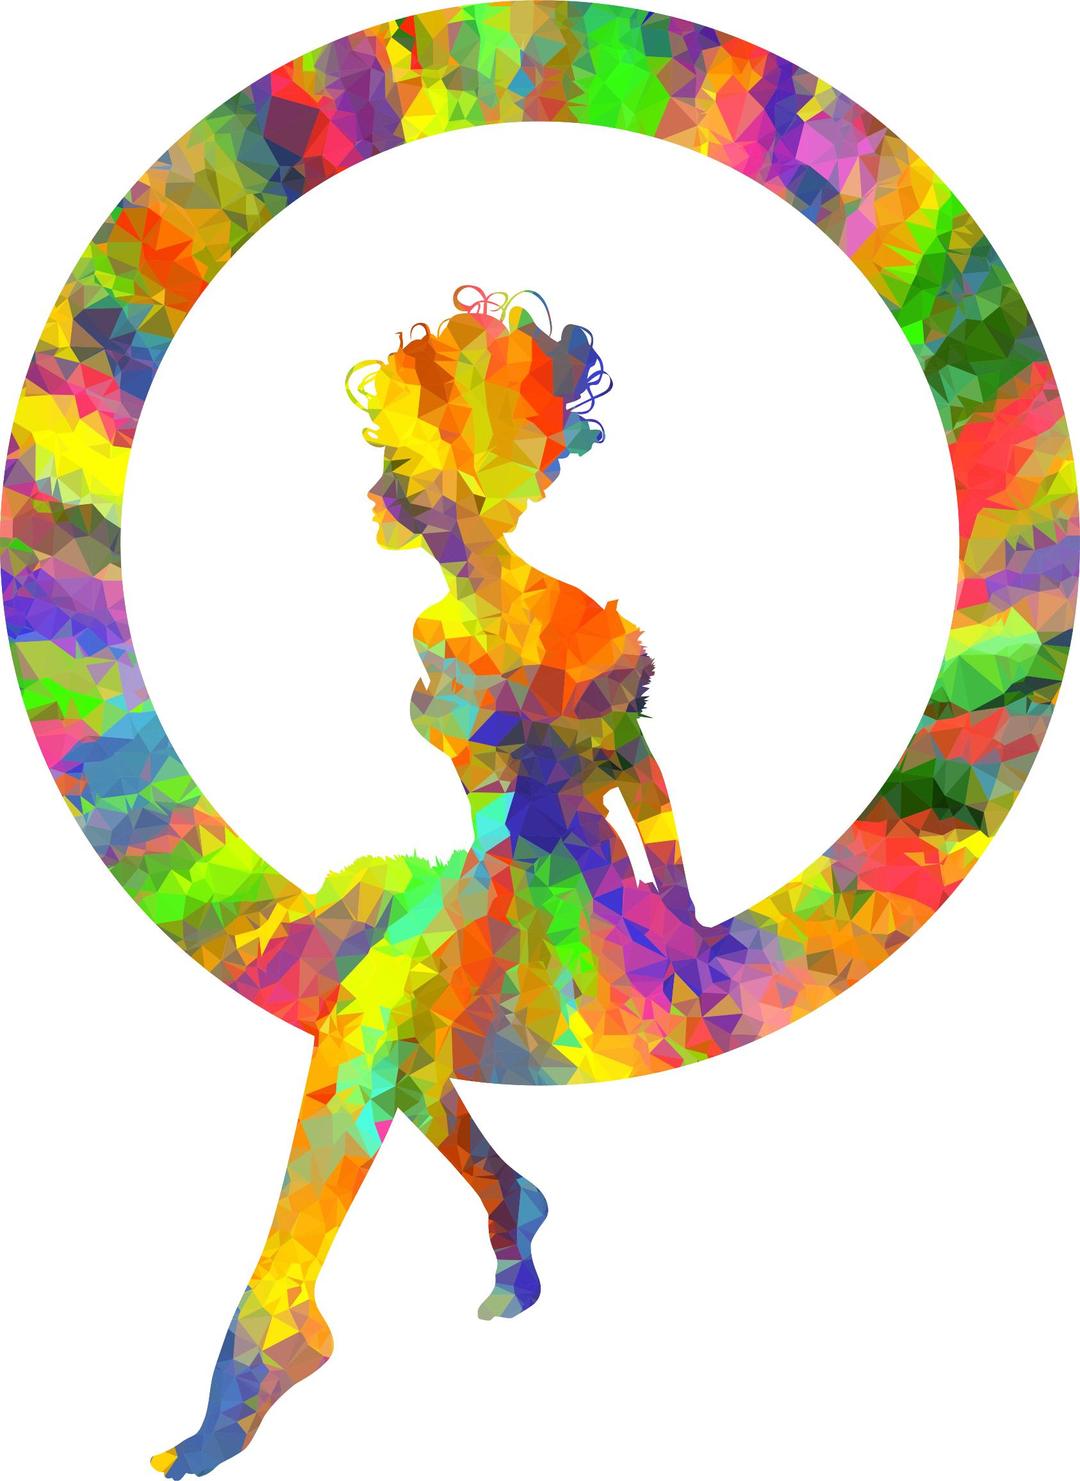 Low Poly Splash Of Color Fairy Sitting In A Circle Silhouette png transparent